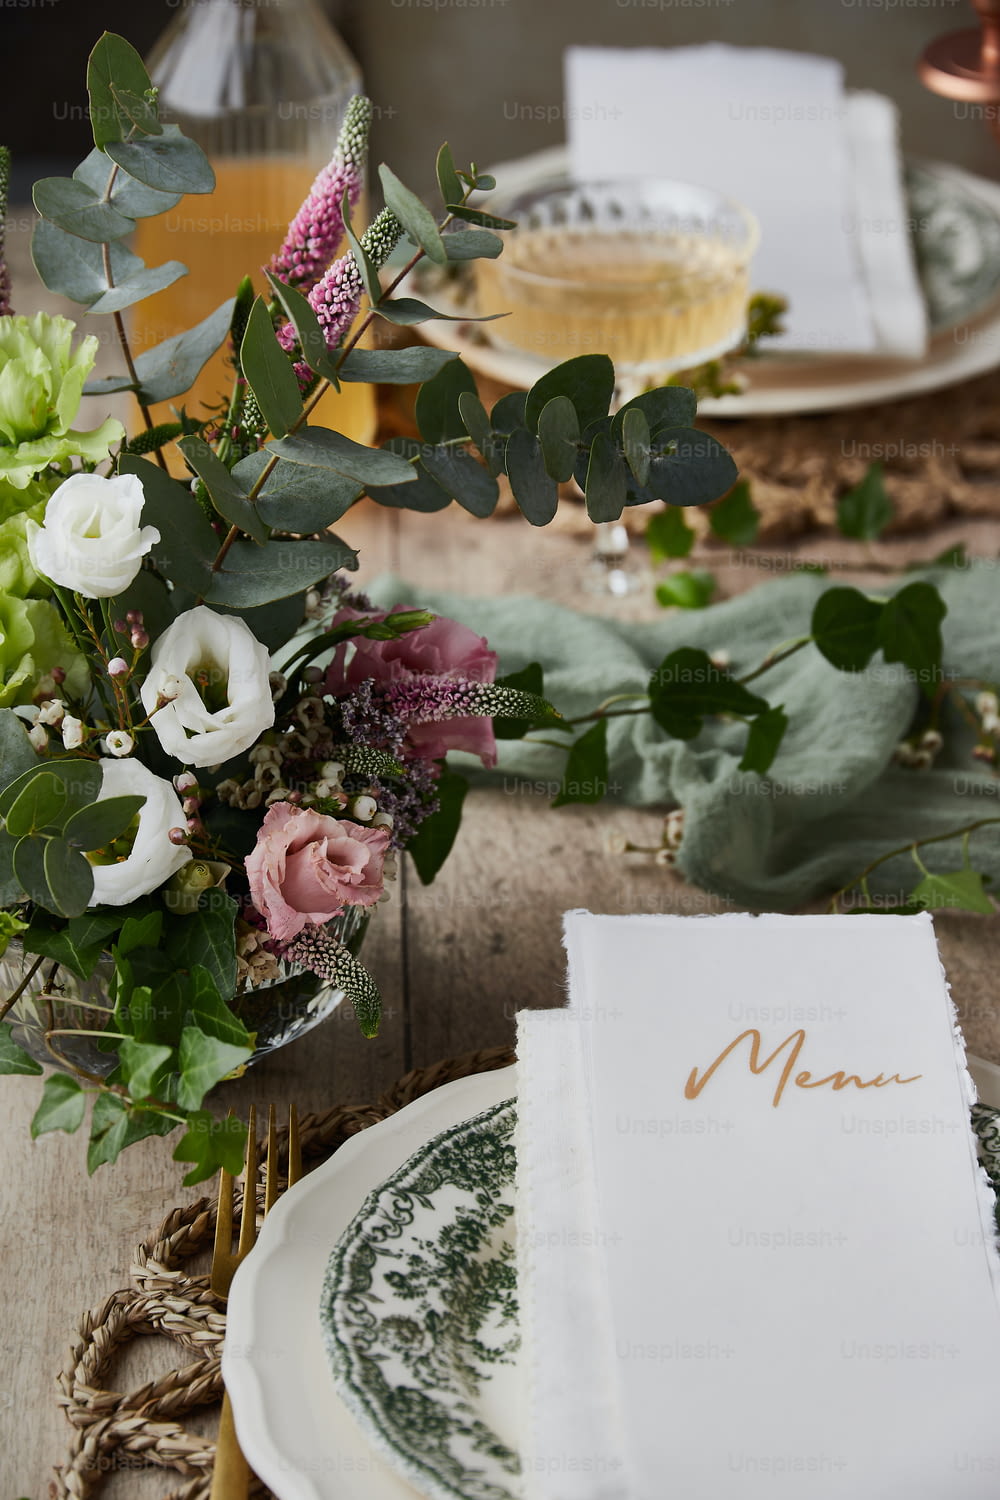 a place setting with a menu and flowers